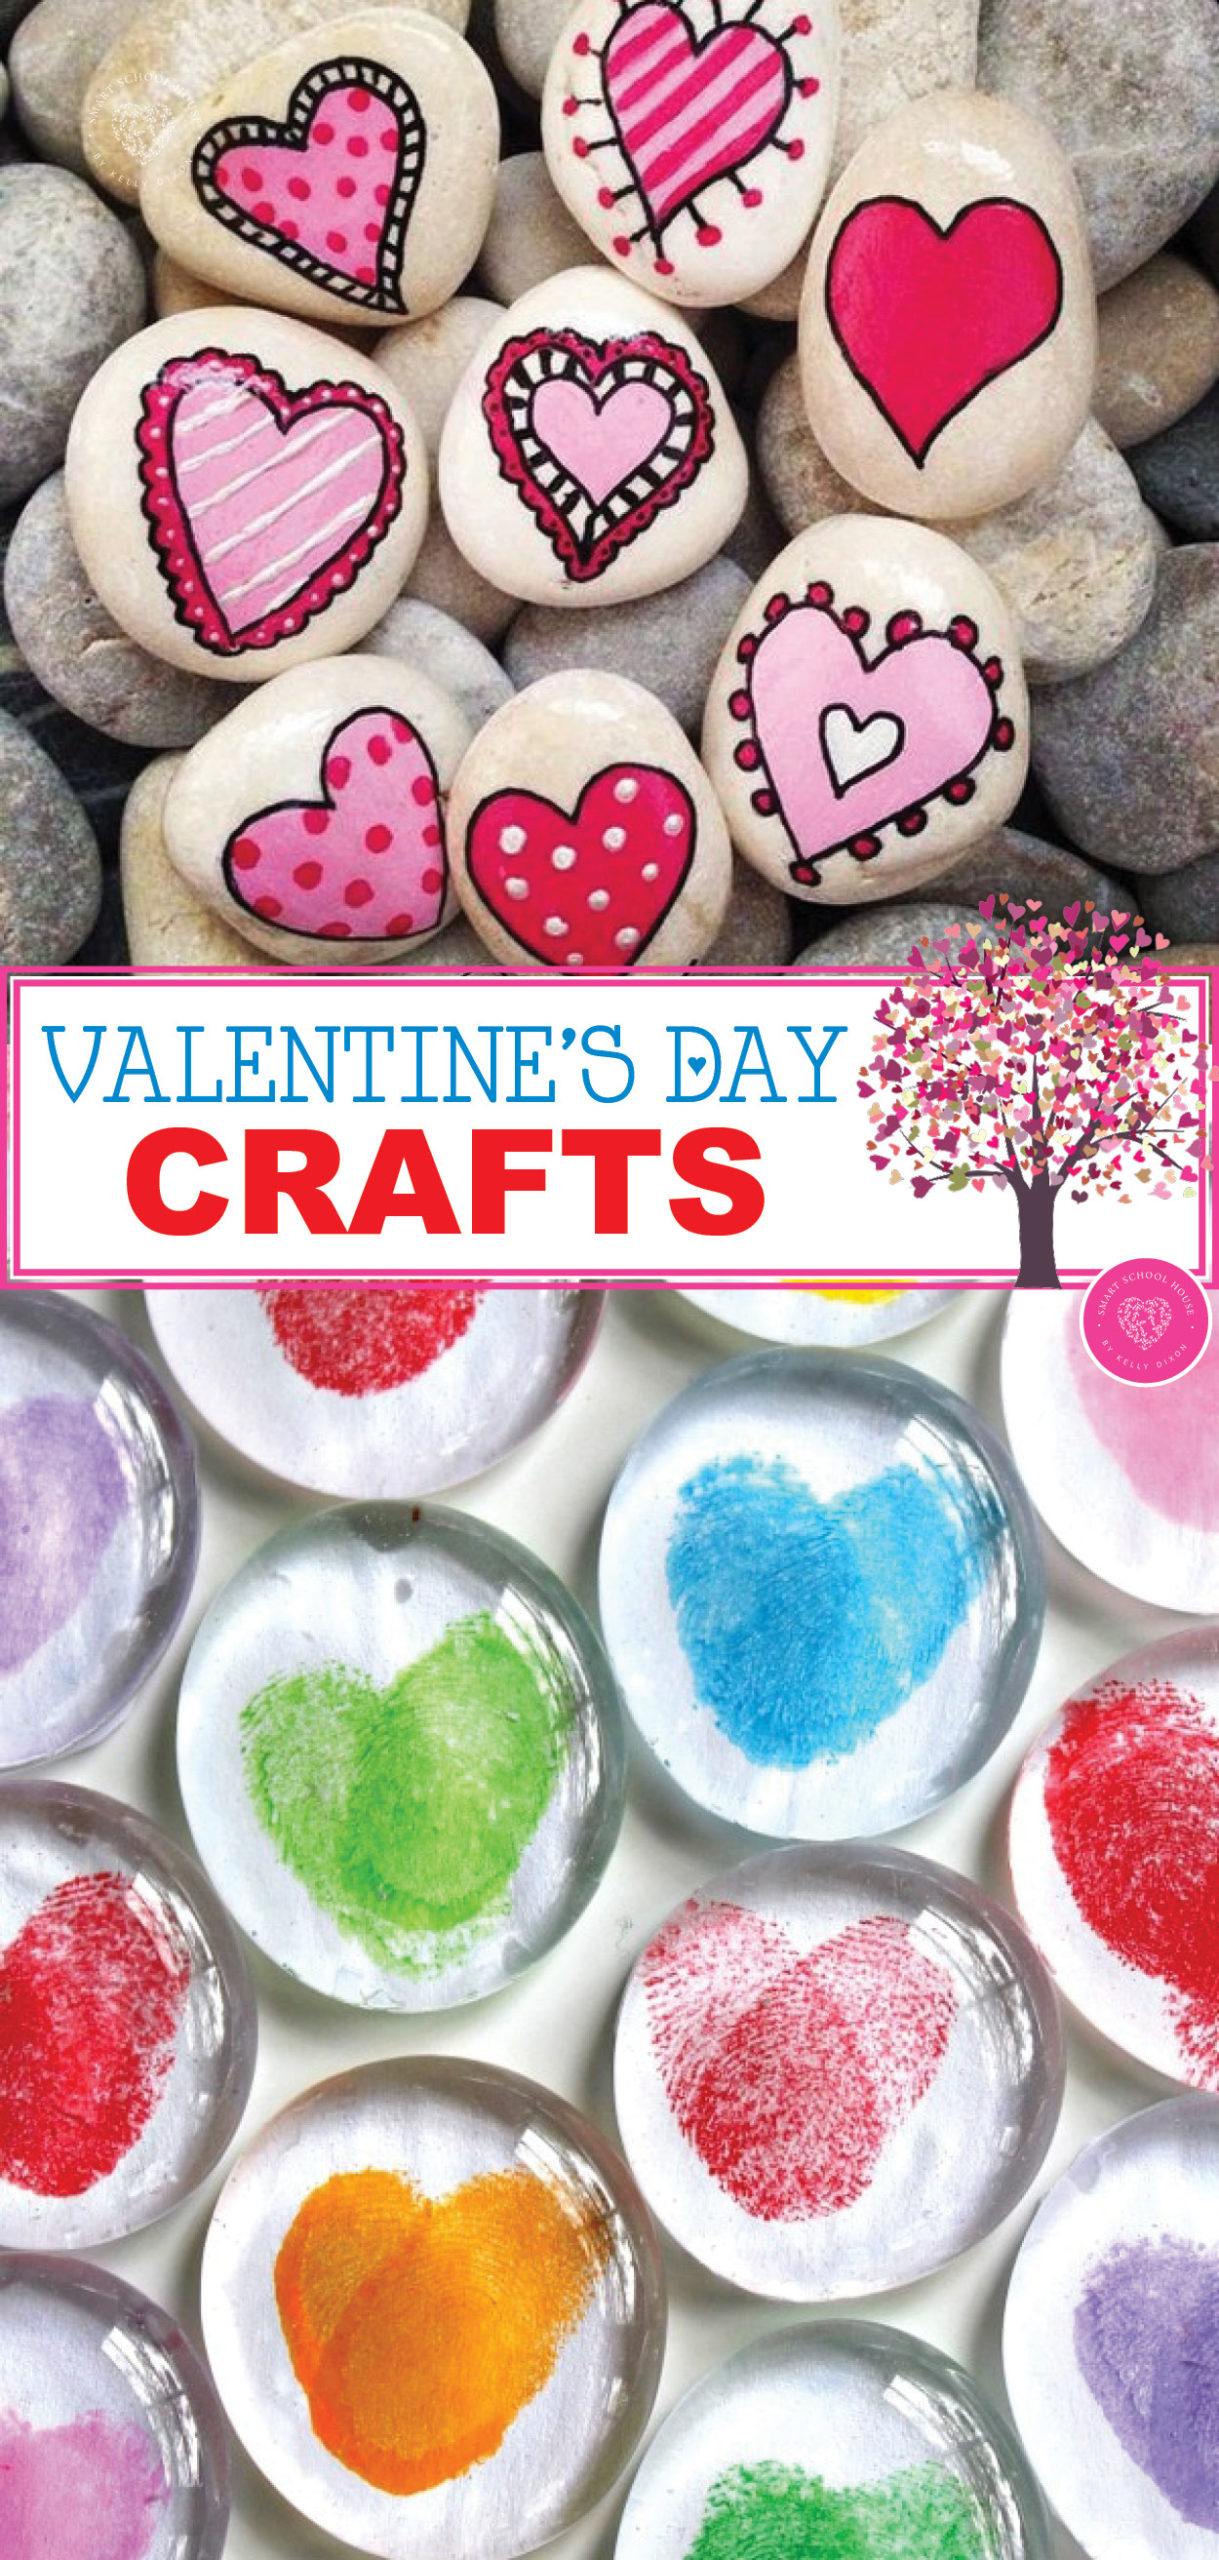 15 Adorable Valentine's Day Crafts